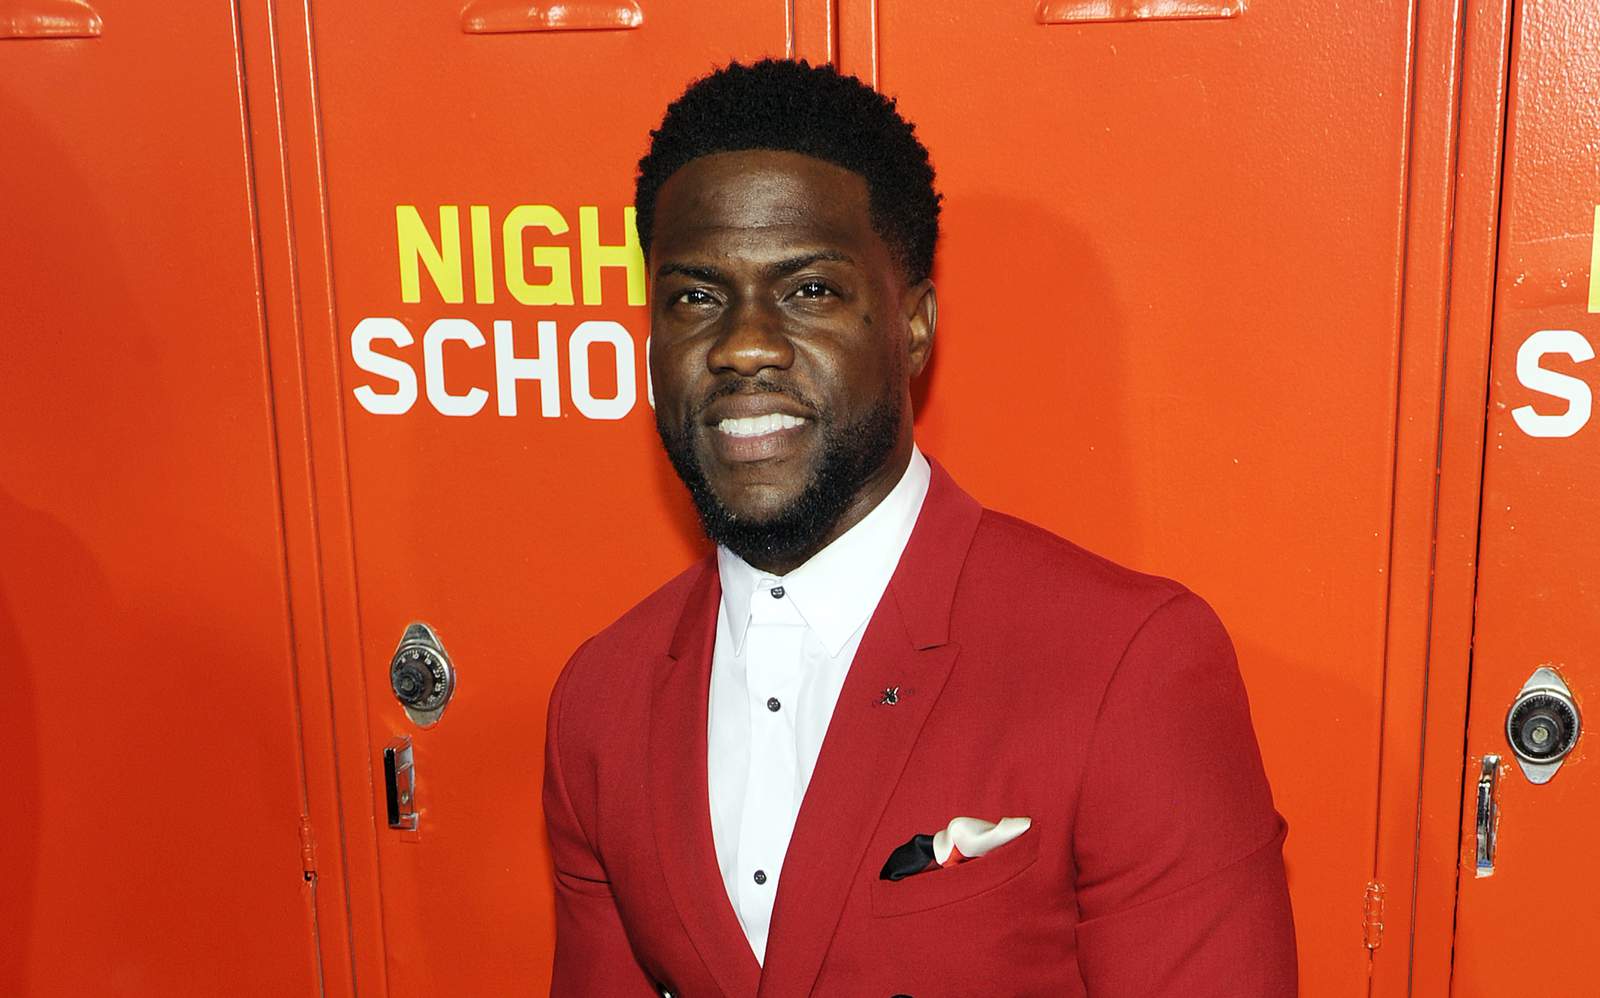 Kevin Hart to debut SiriusXM podcast with Seinfeld as guest